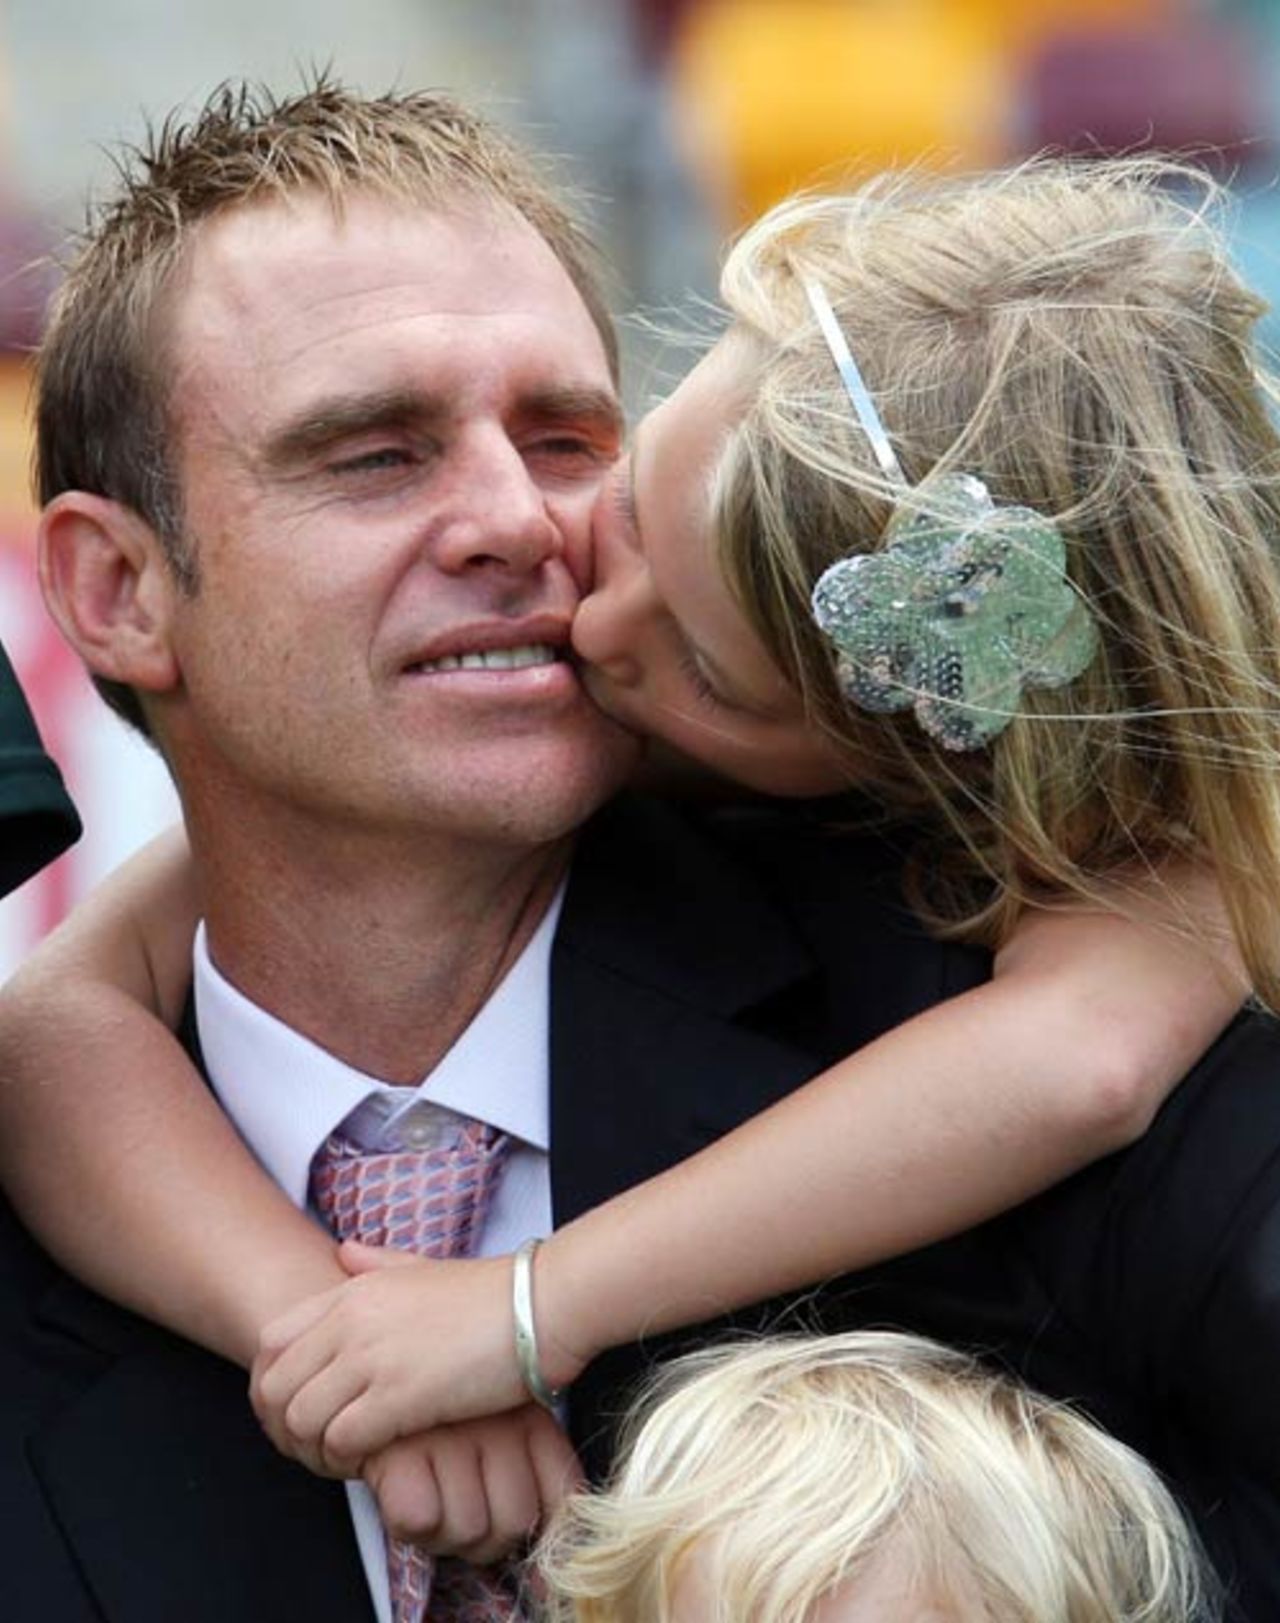 Matthew Hayden gets a kiss from his daughter Grace after announcing his retirement, Brisbane, January 13, 2009